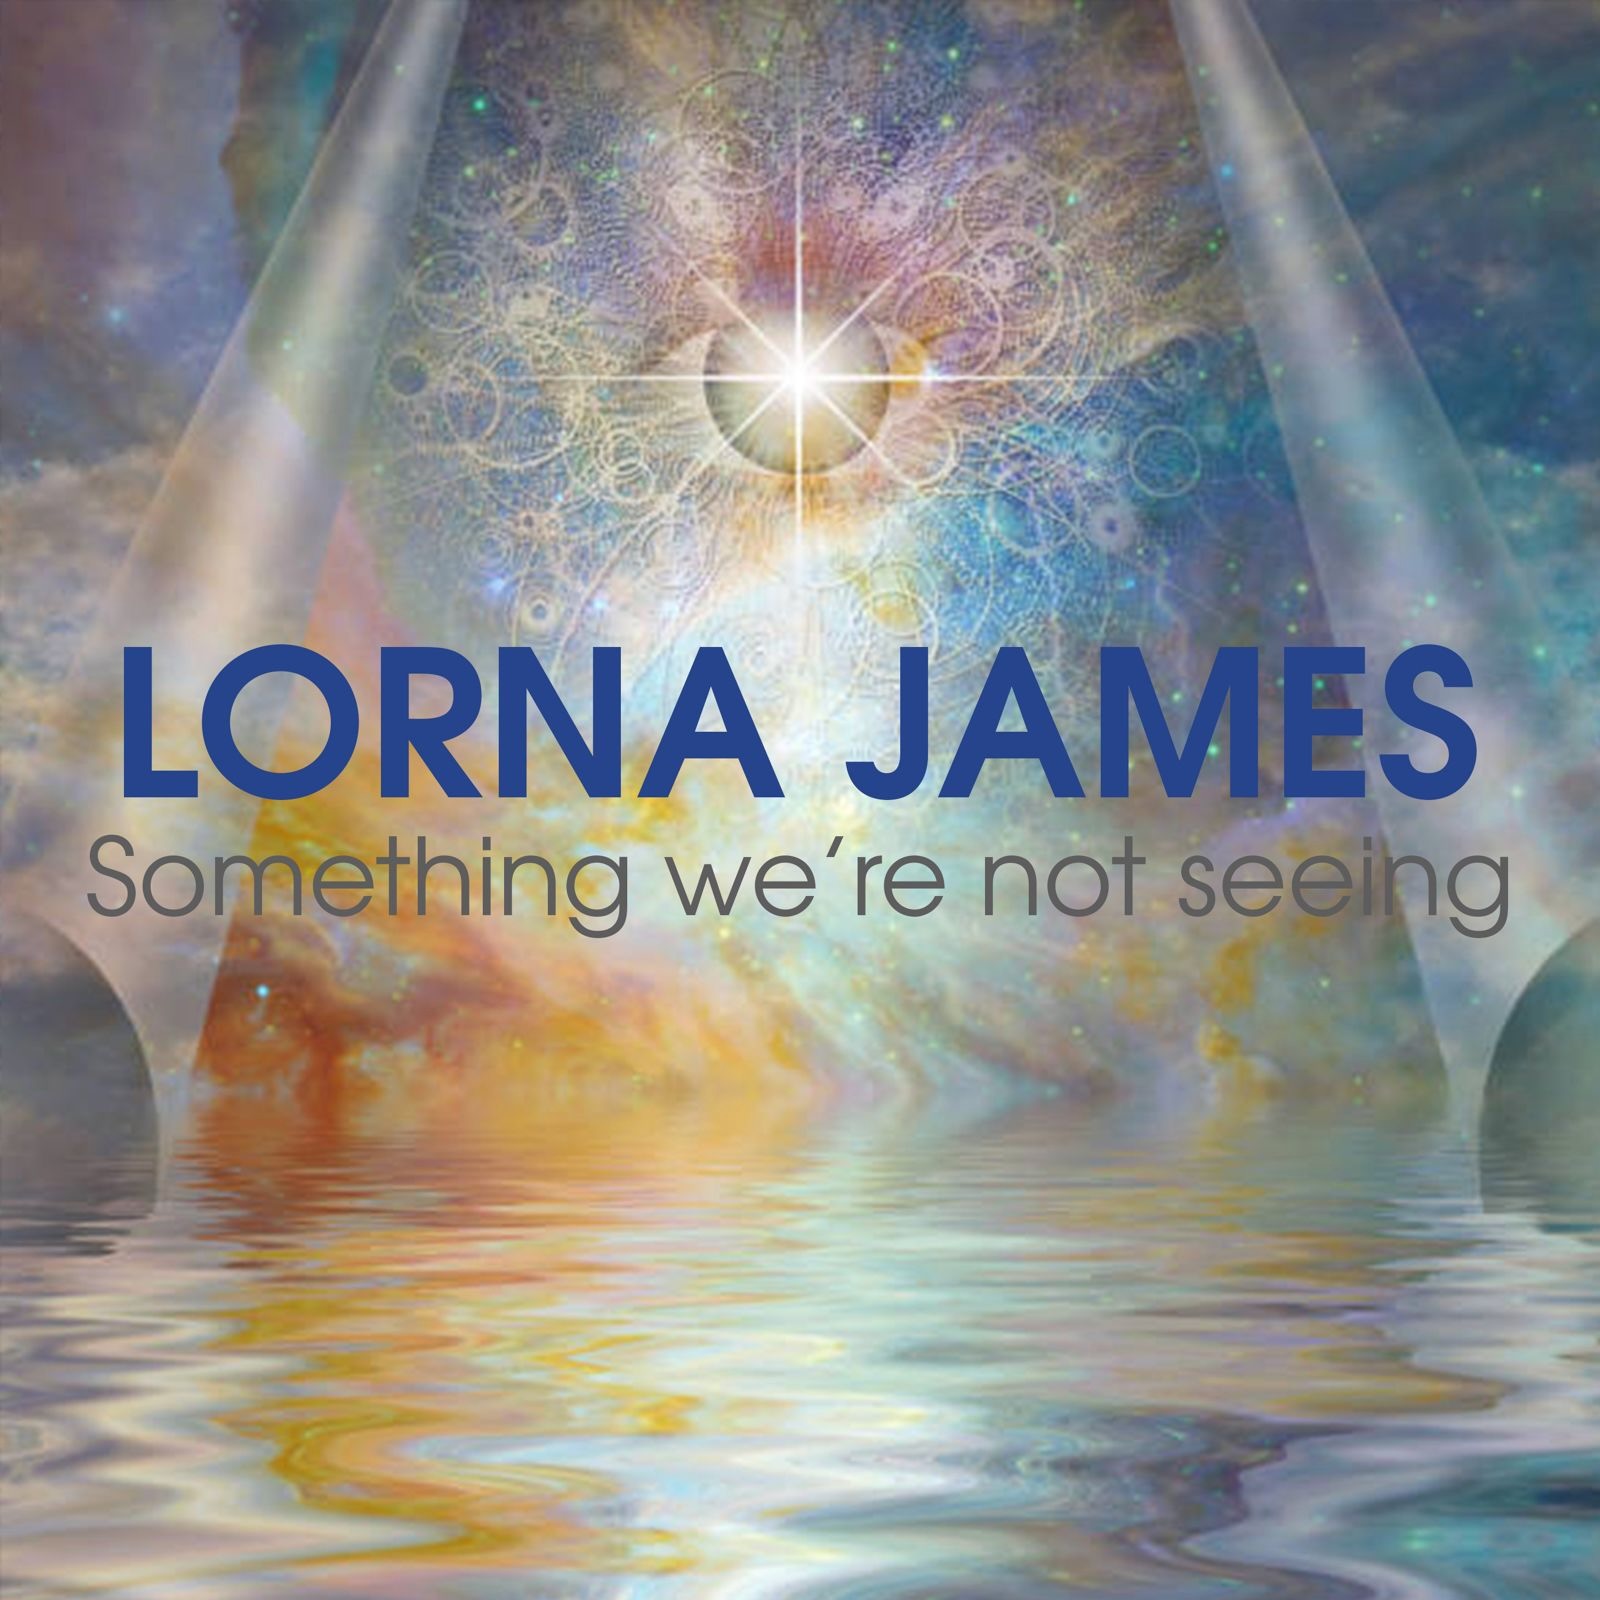 Lorna James' Latest Release is Here: Listen to 'Something We're Not Seeing' Now